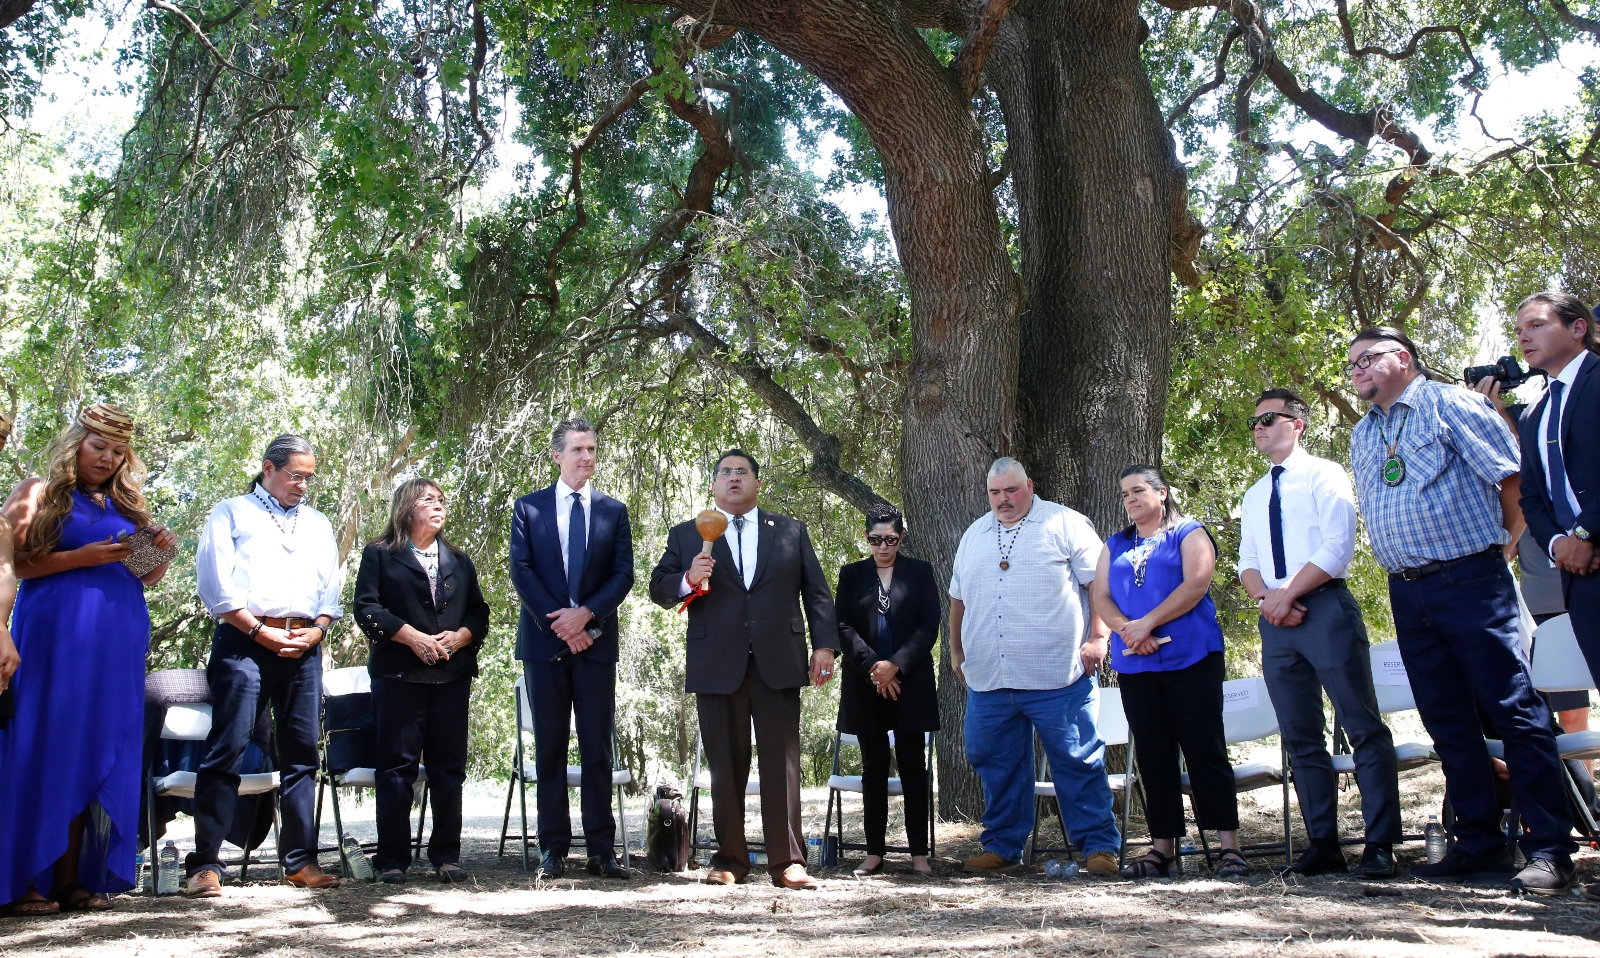 Tribal leaders and Governor Newsom stand in a line under a tree